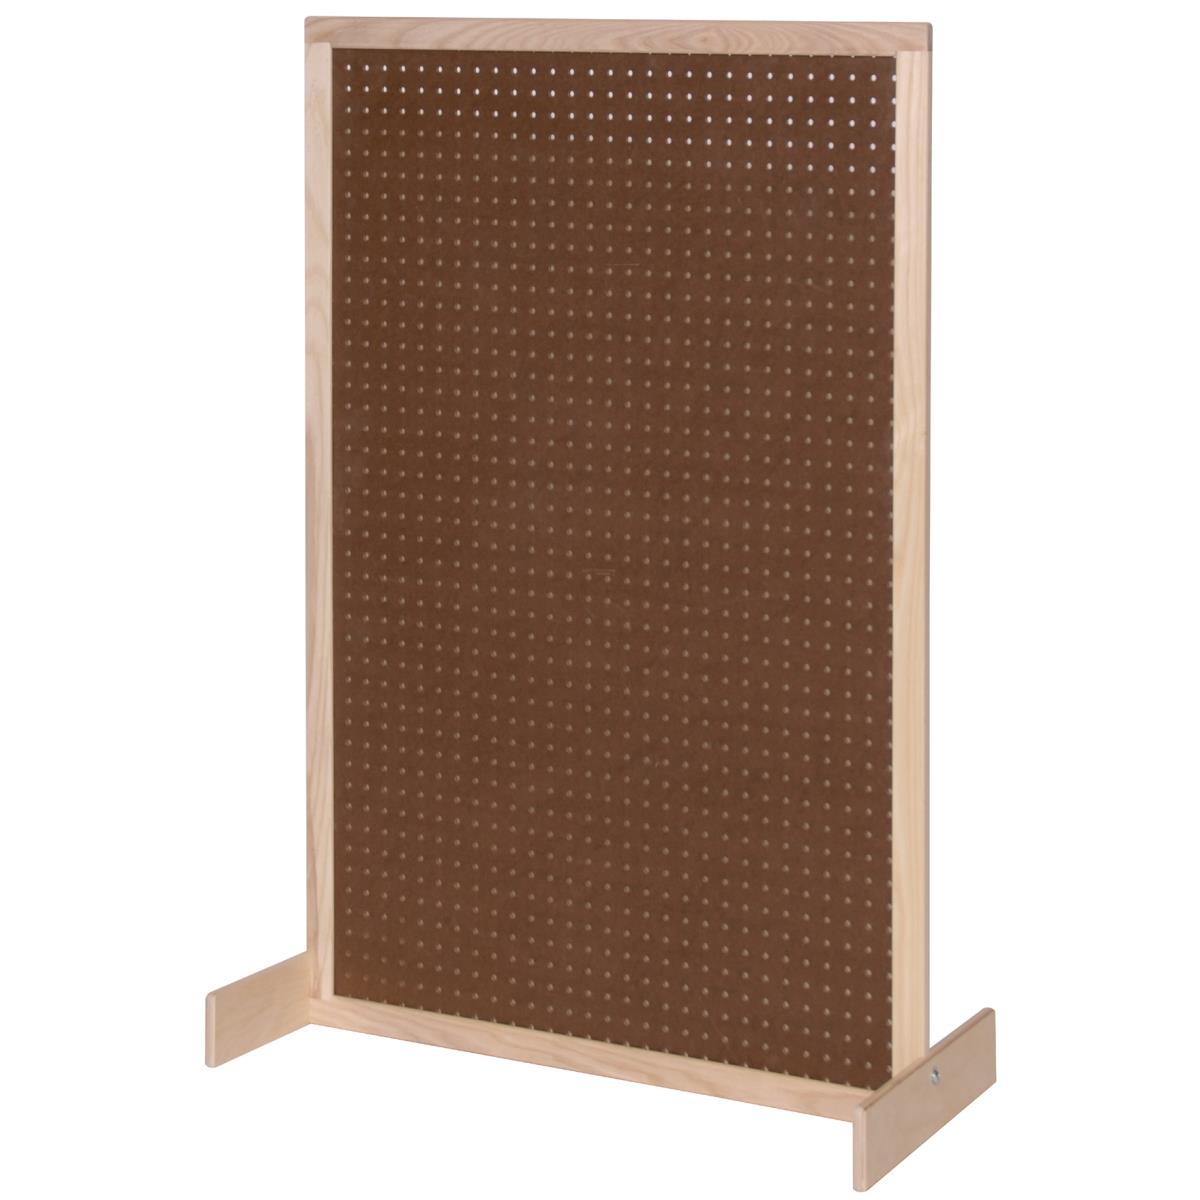 Angeles Ang1123 Pegboard Room Divider - Natural Wood, Maple - 32 X 15 X 48 In.